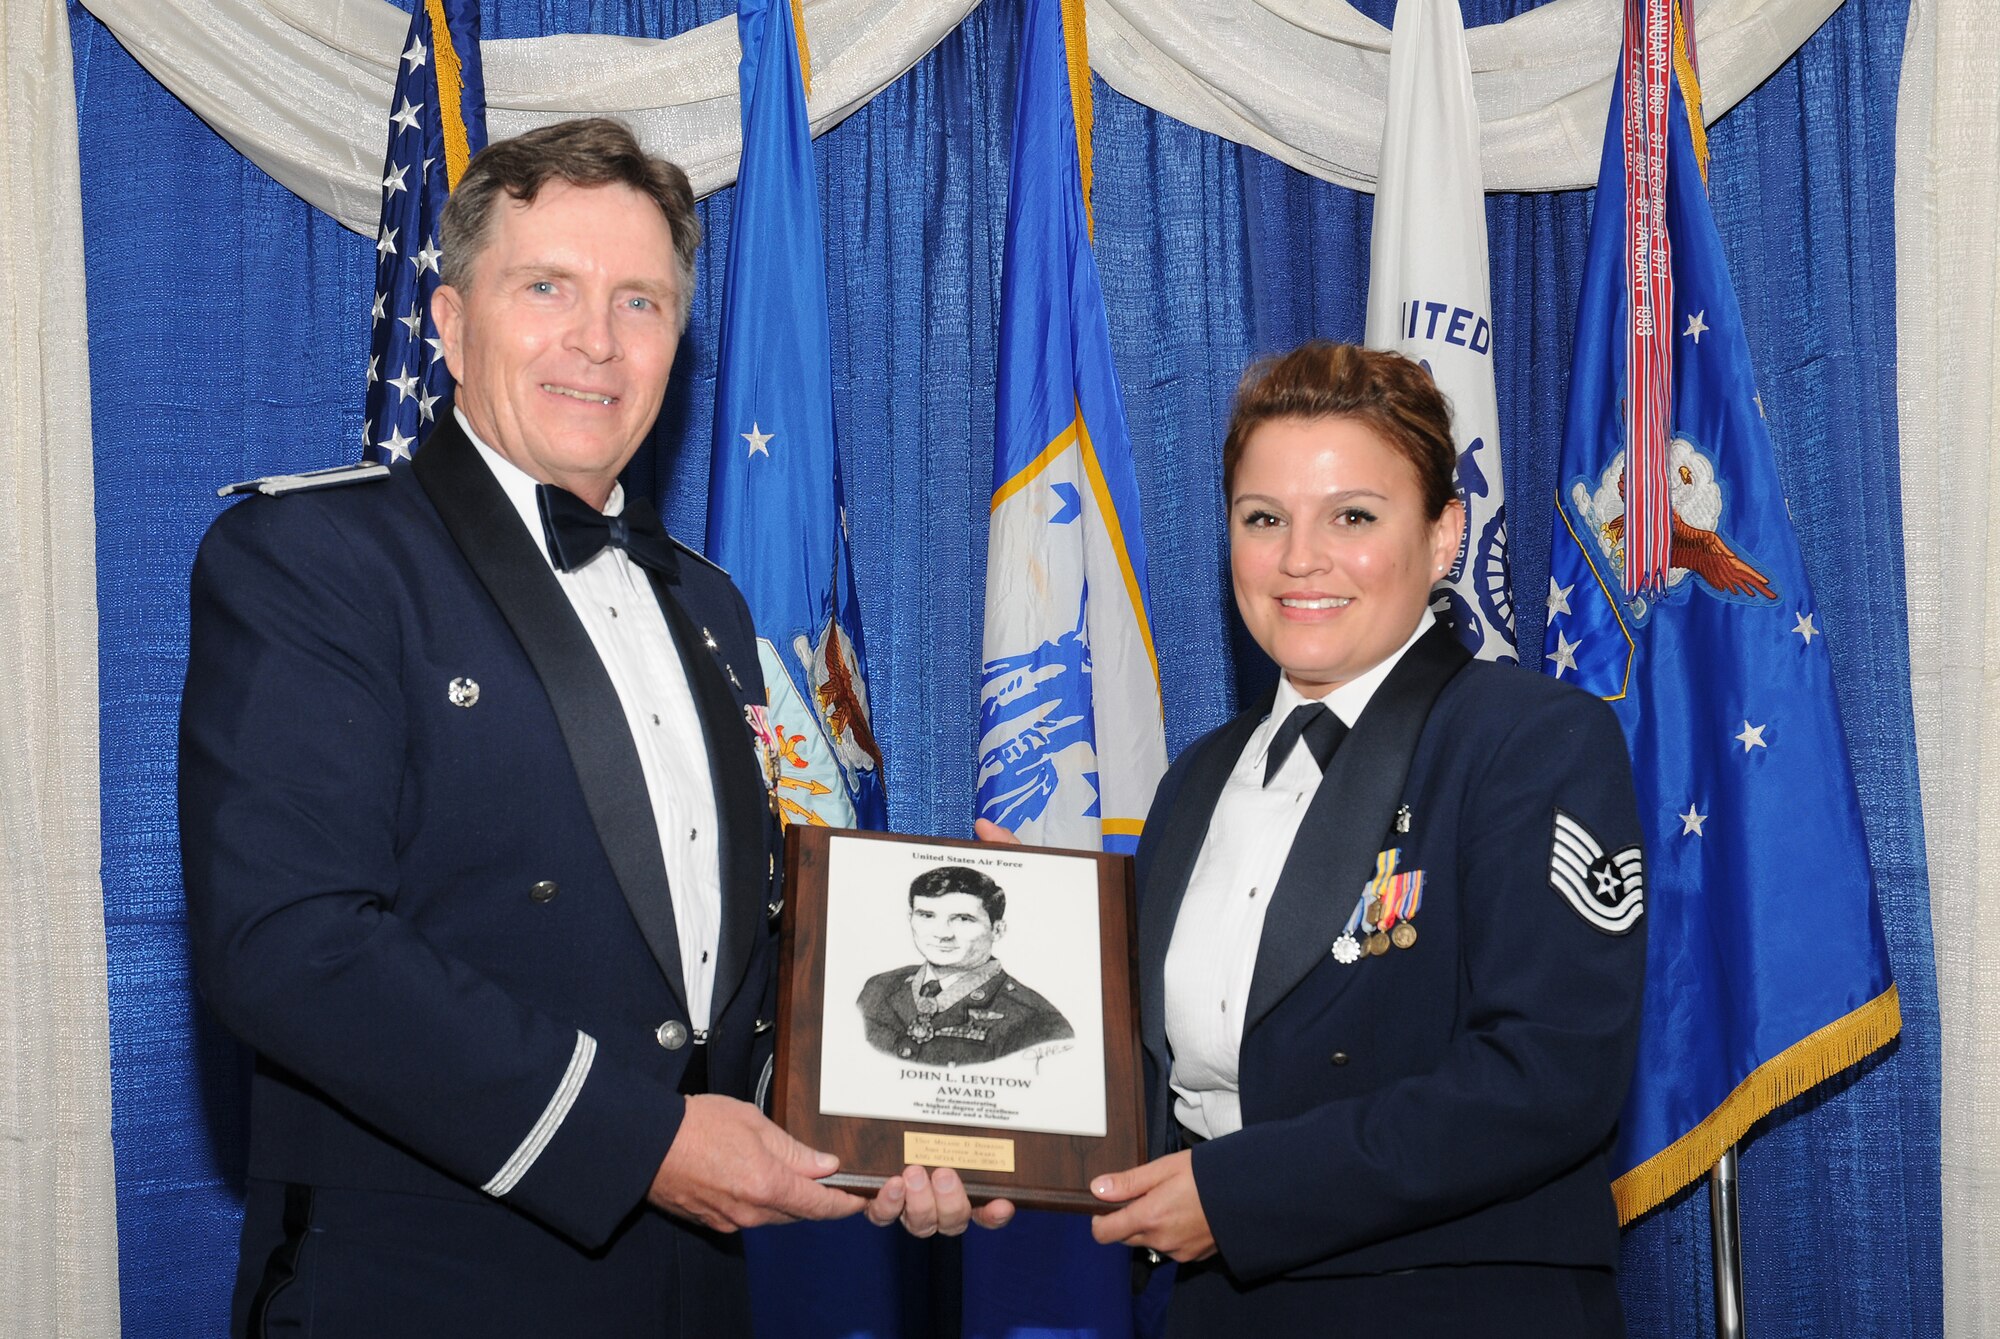 McGHEE TYSON AIR NATIONAL GUARD BASE, Tenn. --  Air Force Tech. Sgt. Melanie D. Dufresne, right, the NCOIC of the ambulatory procedures unit, 88th Surgical Operations Squadron, Wright-Patterson AFB, Ohio, receives the John L. Levitow honor award for NCO Academy Class 10-5 at The I.G Brown Air National Guard Training and Education Center here from Col. Richard B. Howard, commander, June 2, 2010.  The John L. Levitow award is the highest honor awarded a graduate of any Air Force enlisted professional military education course.  (U.S. Air Force photo by Master Sgt. Kurt Skoglund/Released)